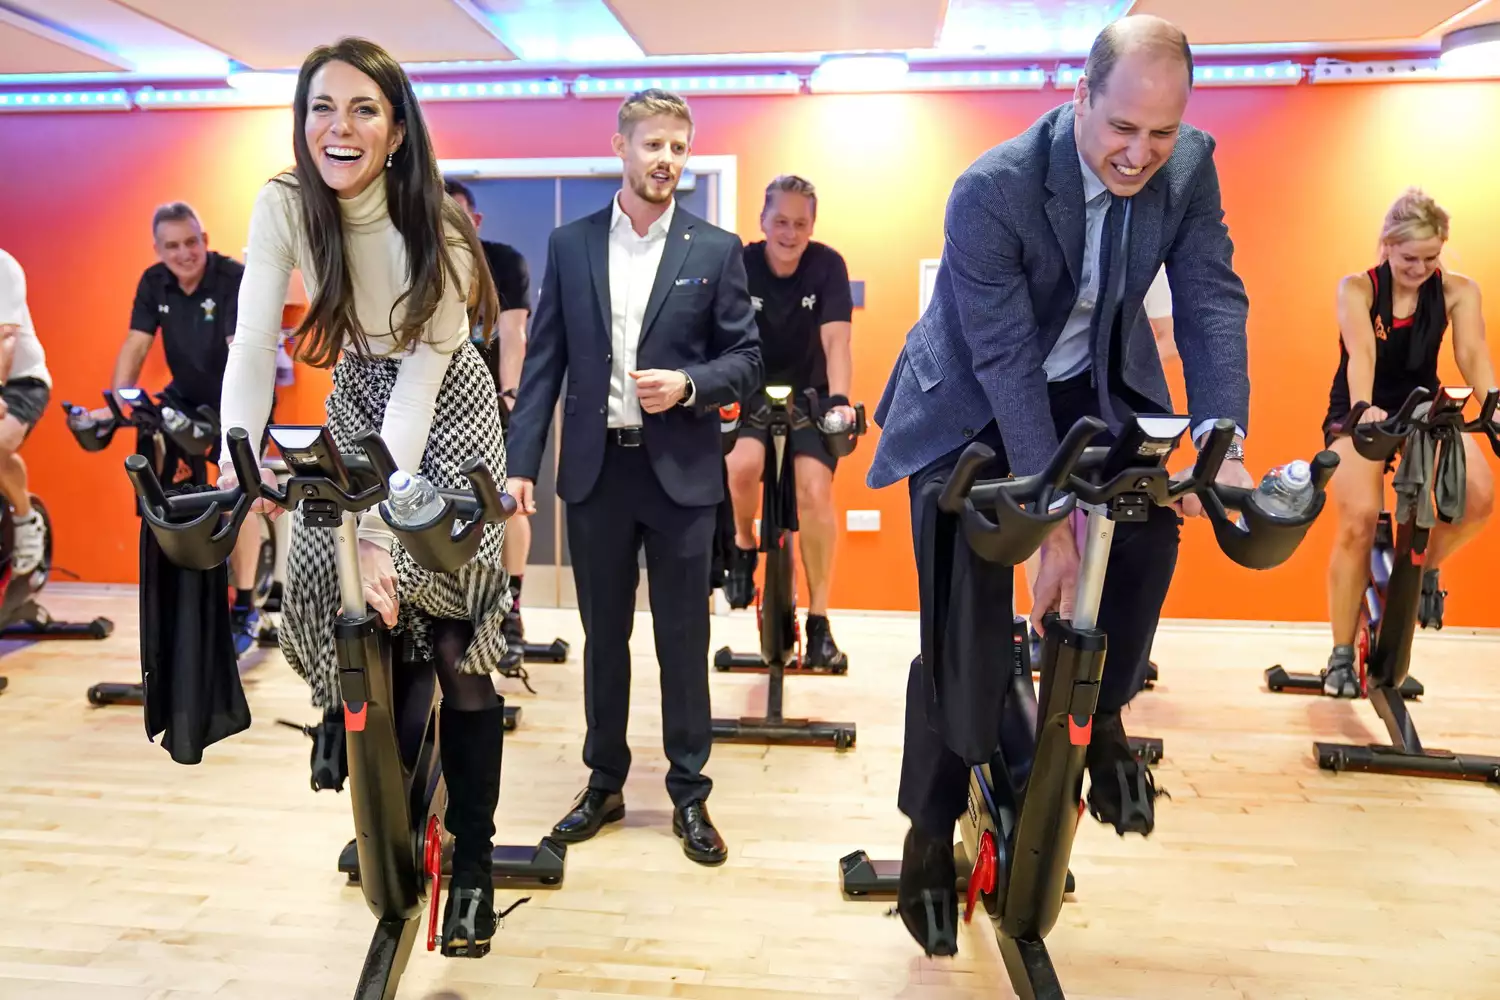 Kate Middleton and Prince William Raced Each Other During a Spin Class—Here’s Who Won